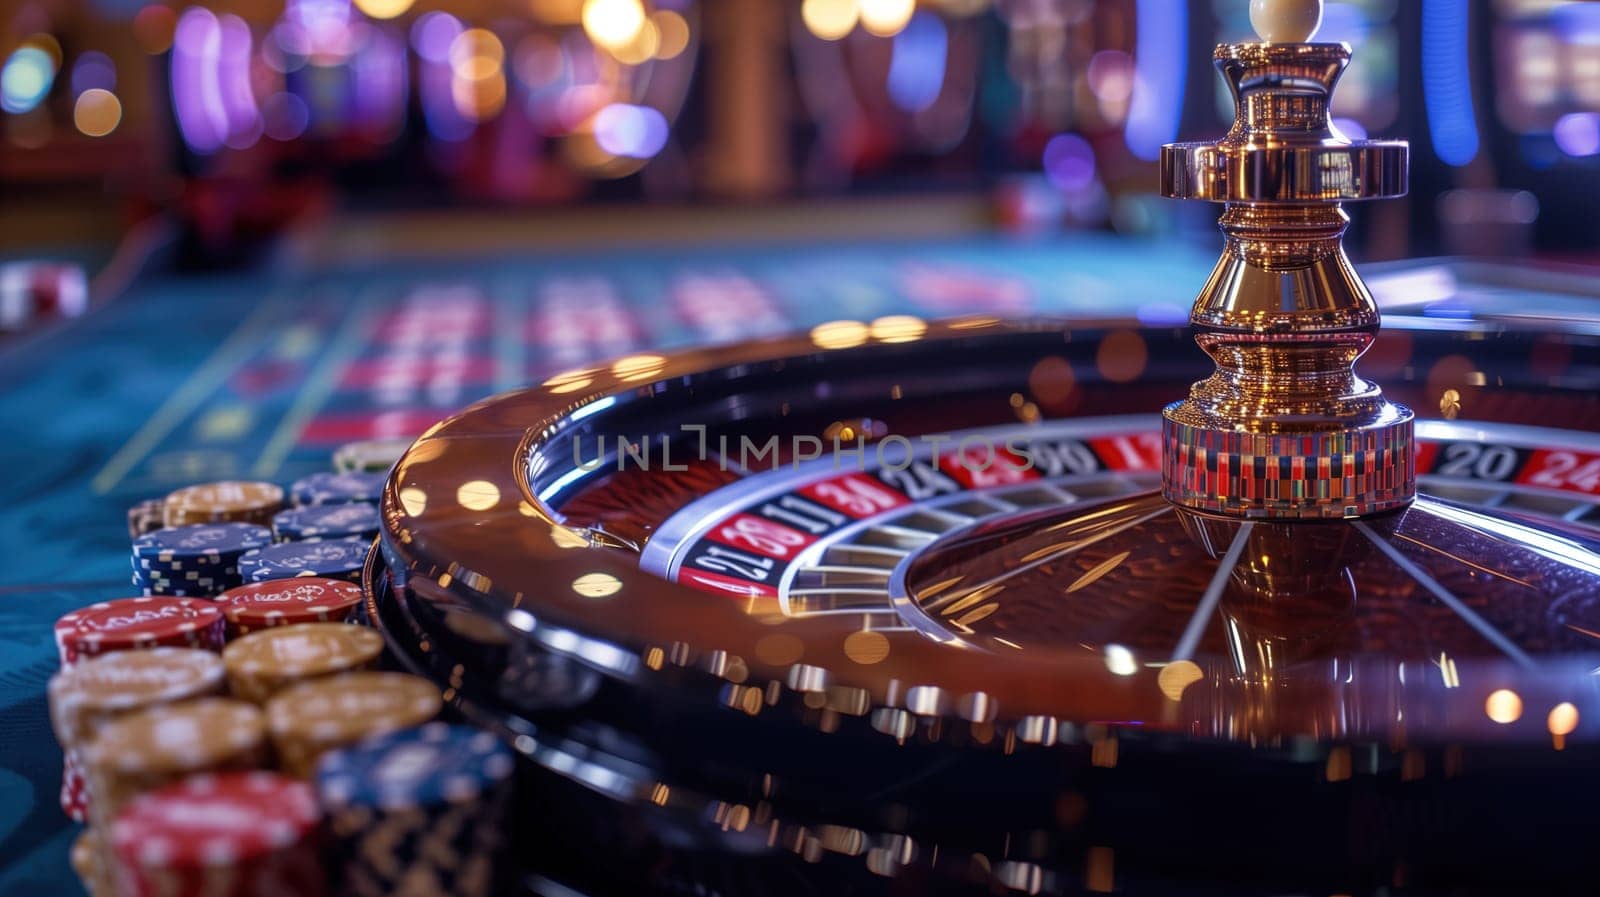 Casino Roulette Table With Chips by TRMK